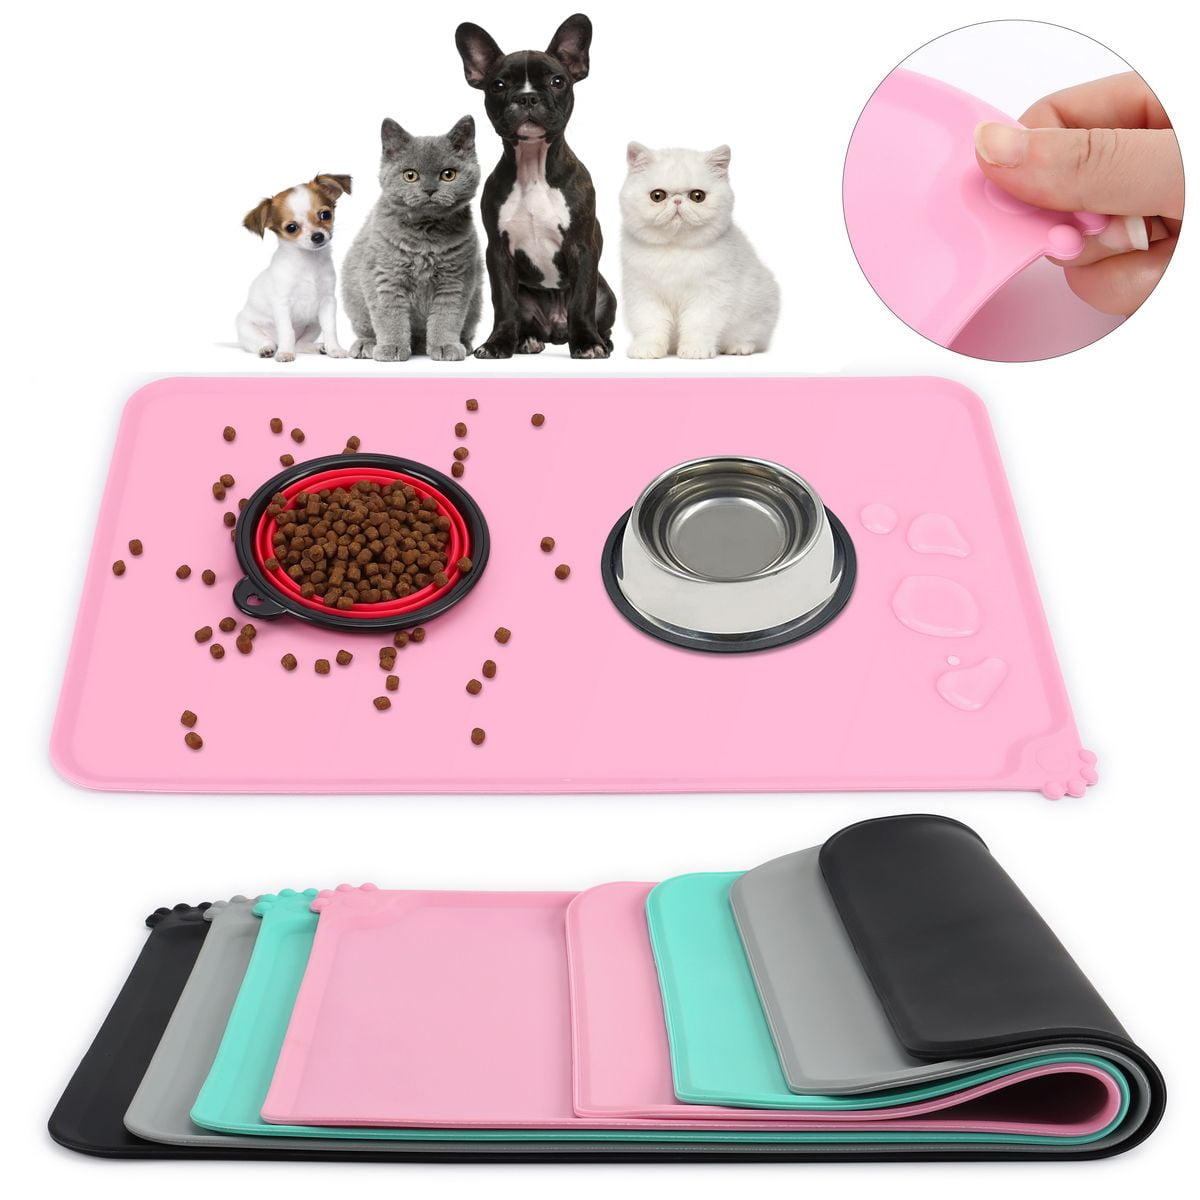 Deago Dog Cat Food Feeding Mat Raised Edge Silicone Non Slip Waterproof Pet  Food and Water Bowl Mat - 19 x 12 Inches, Black